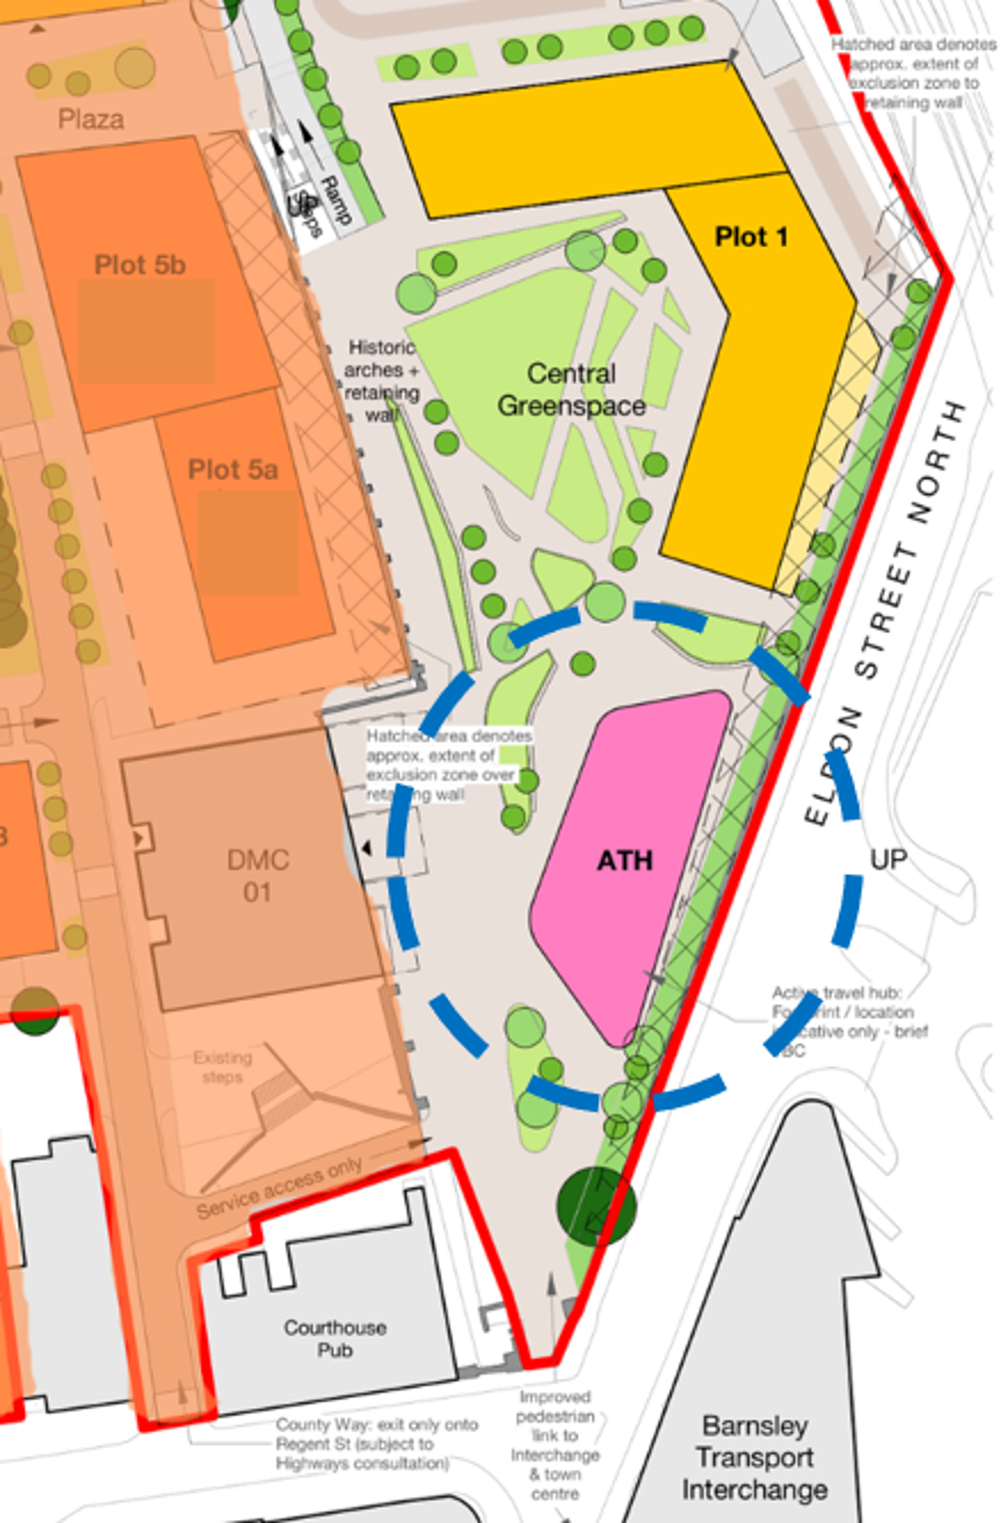 The Seam plan showing new Active Travel Hub